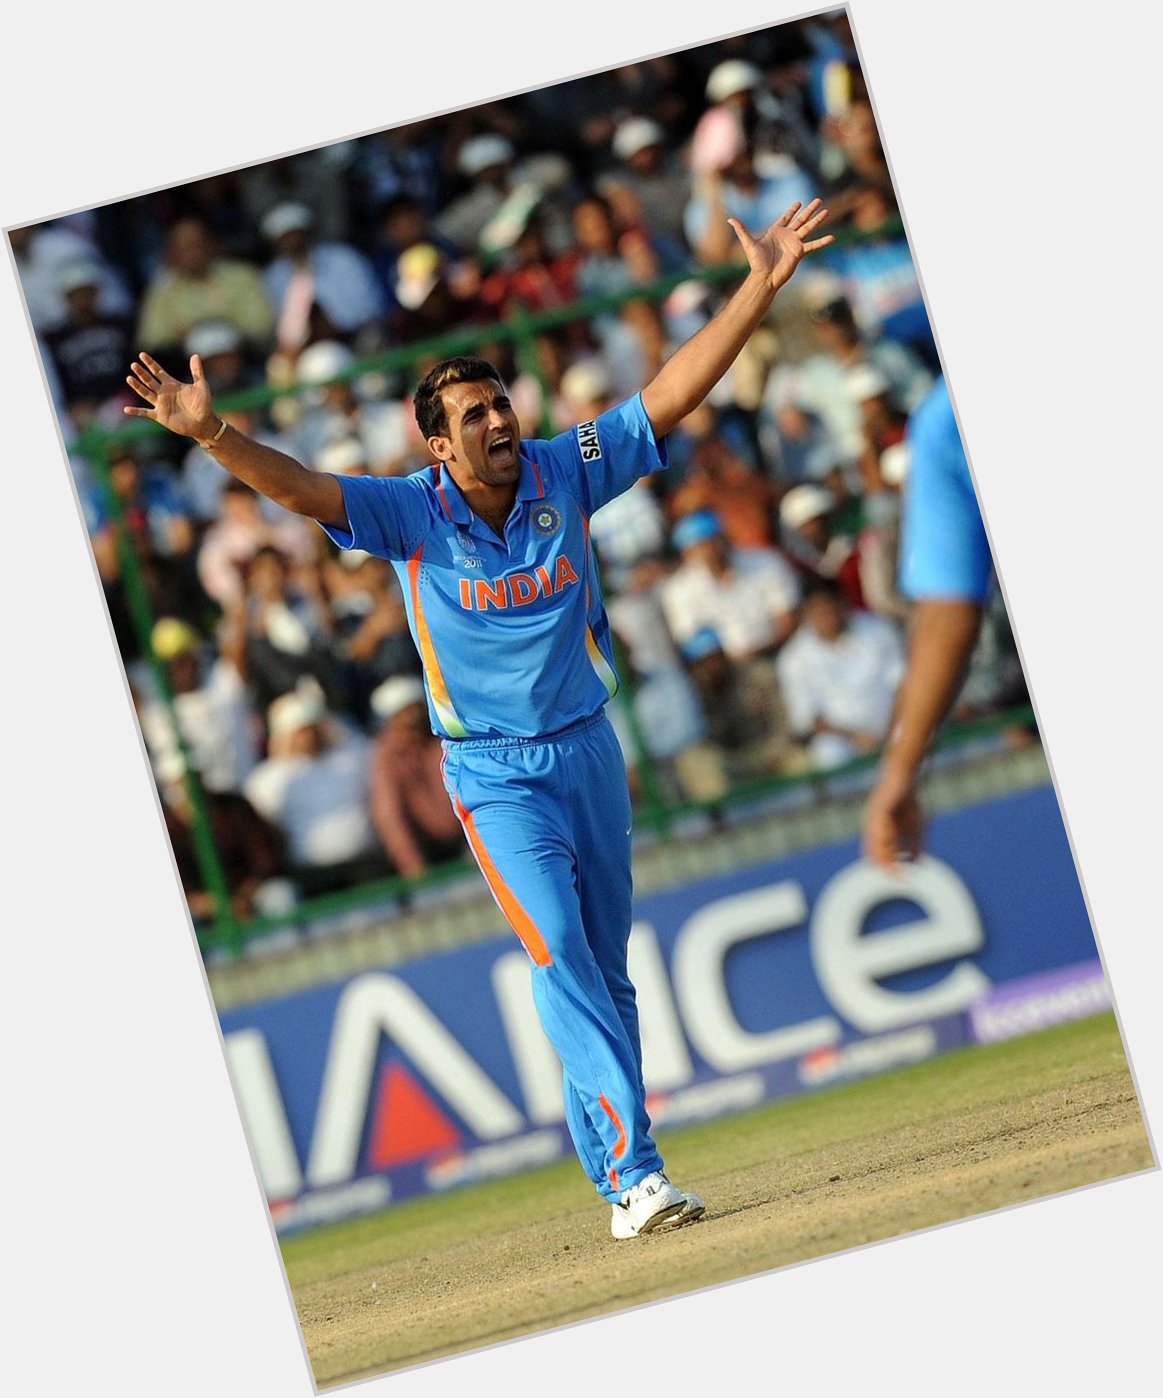 Happy bday Sir Zaheer khan u r the best fast bowler India has ever produced 